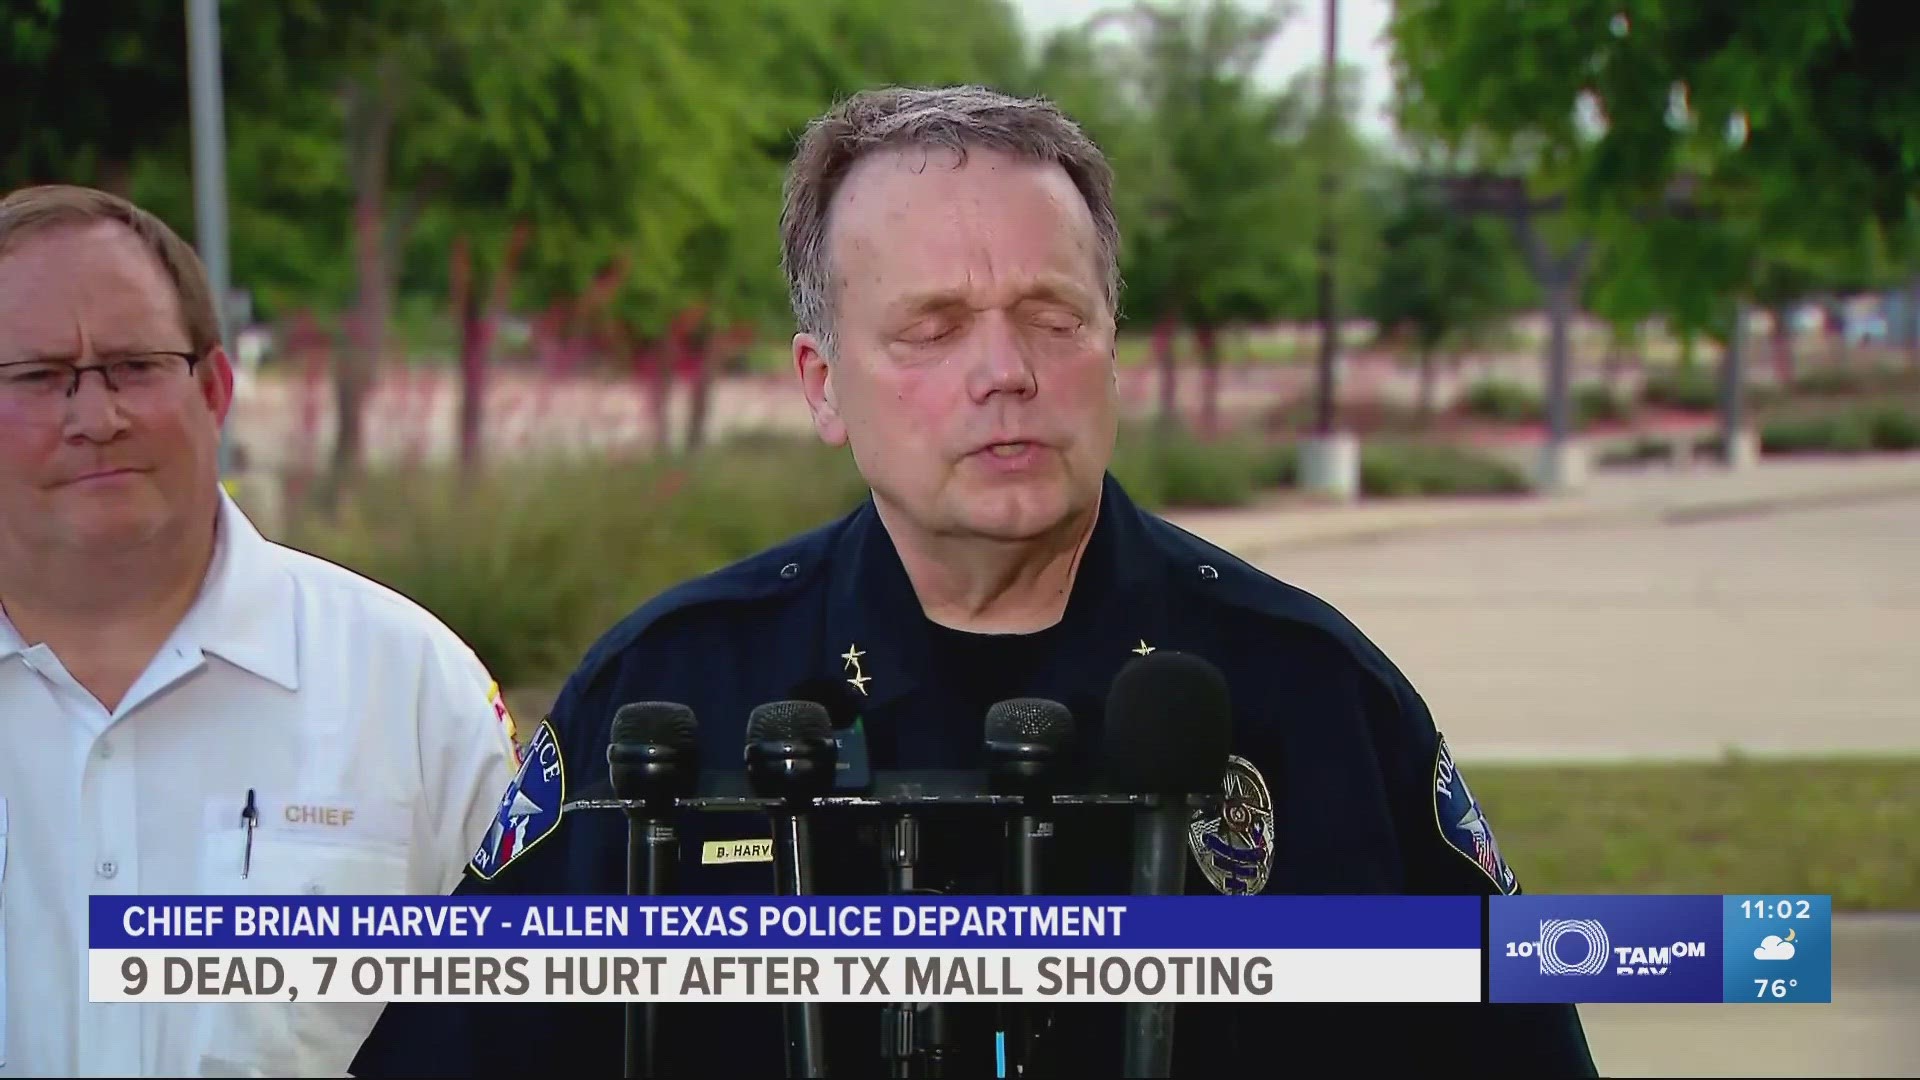 Police say the shooter is dead and multiple children were among the victims.